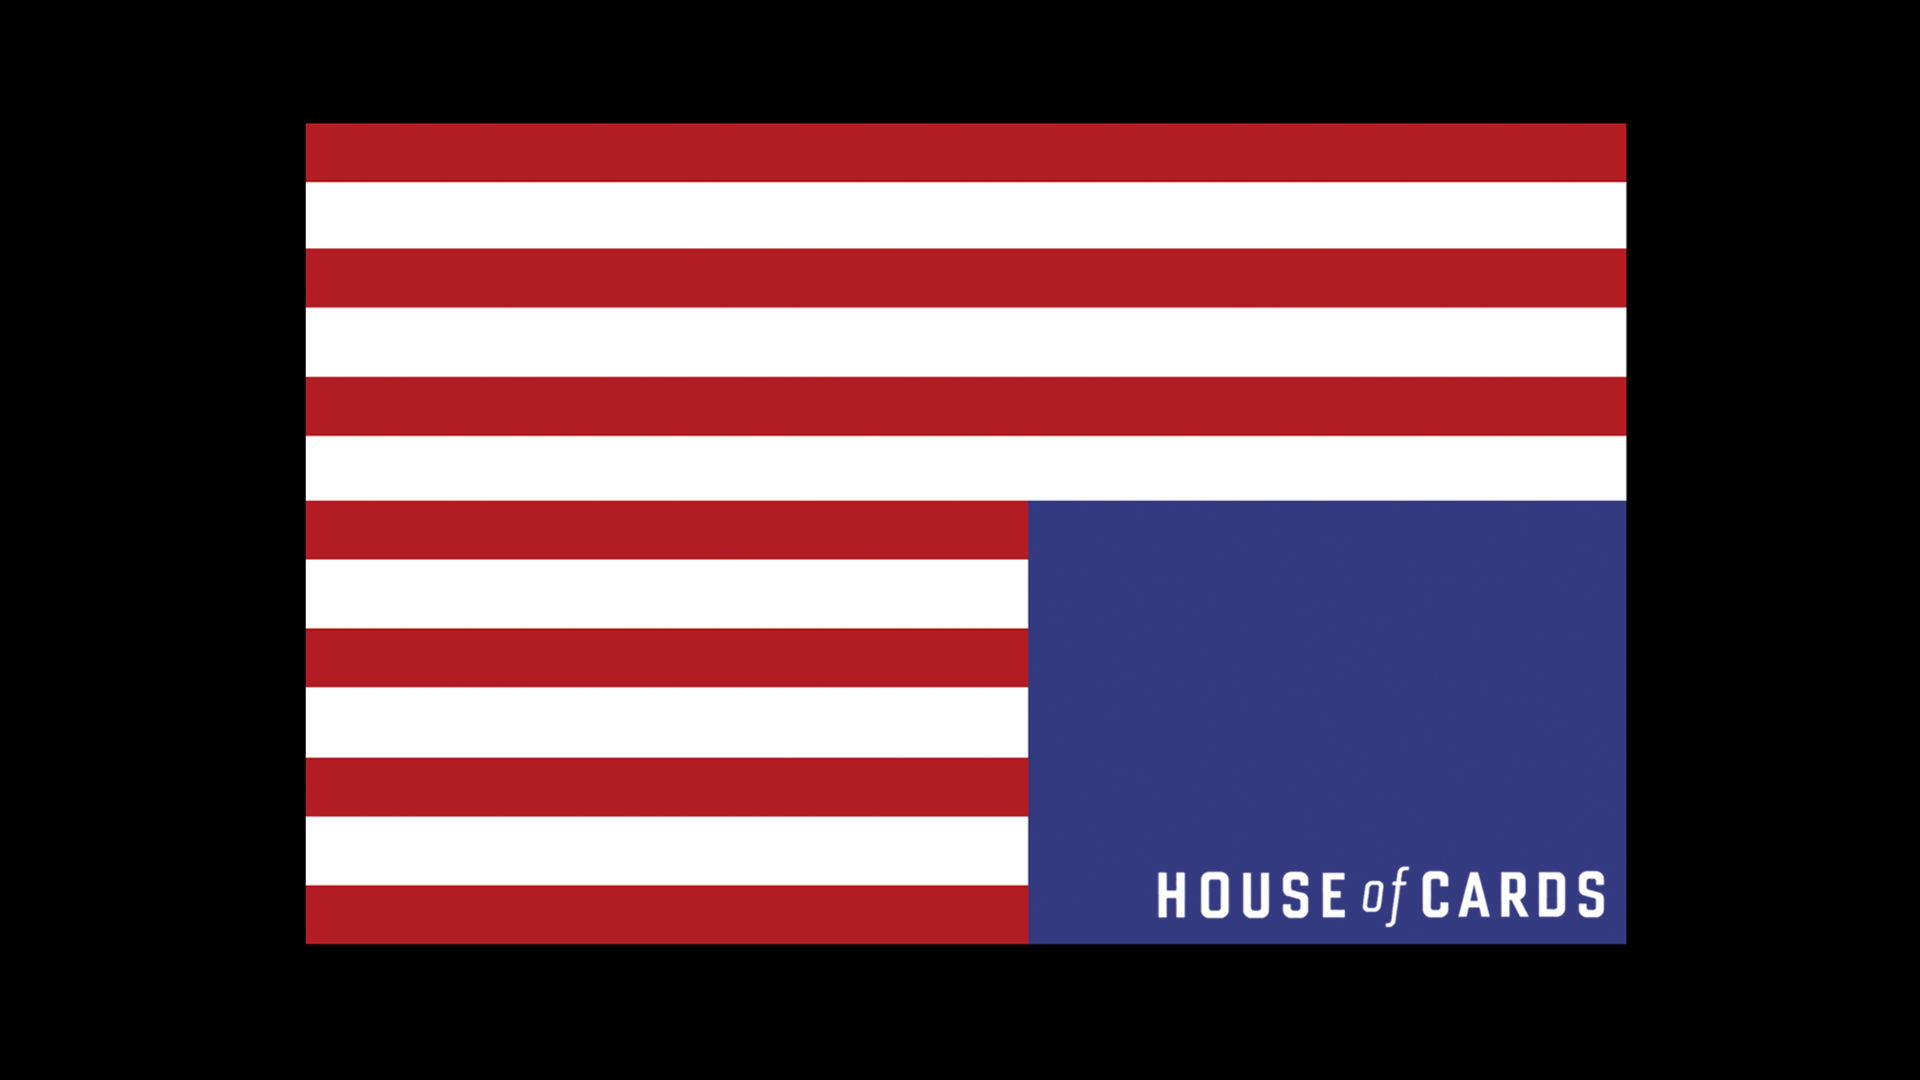 Minimalistic House of Cards Wallpaper